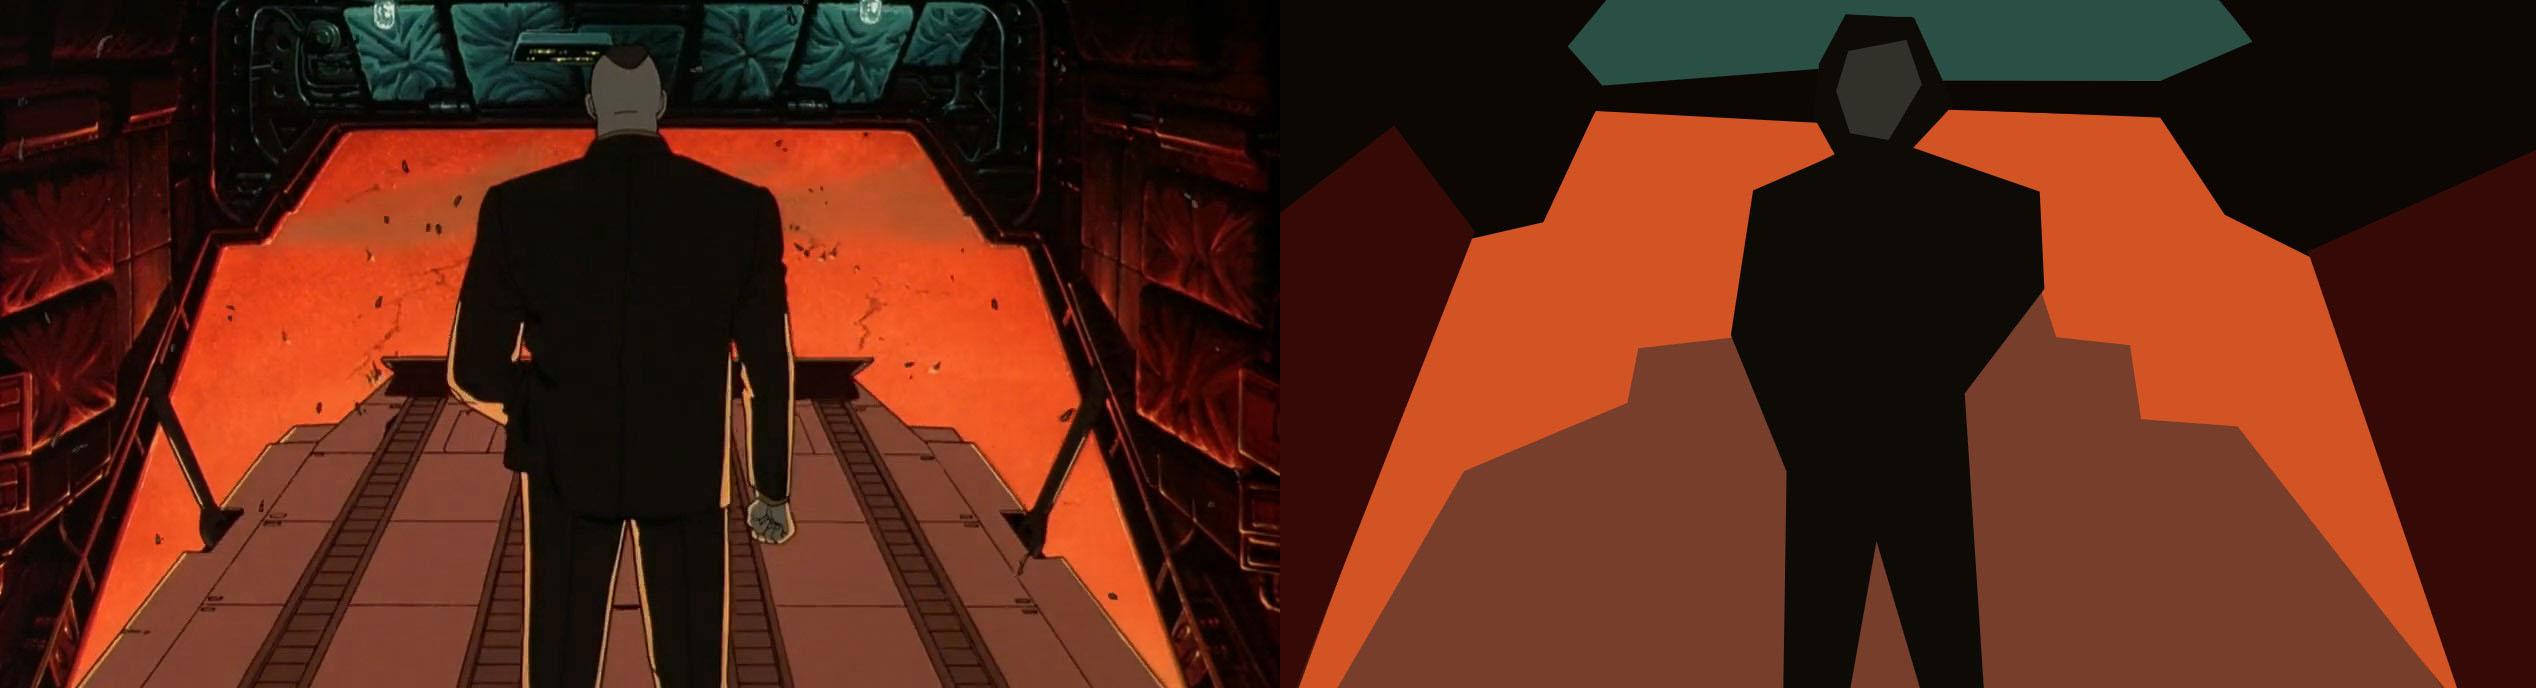 AKIRA Screenshot Movie Composition Cinematography171 copy-color-combinations copy-side-by-side